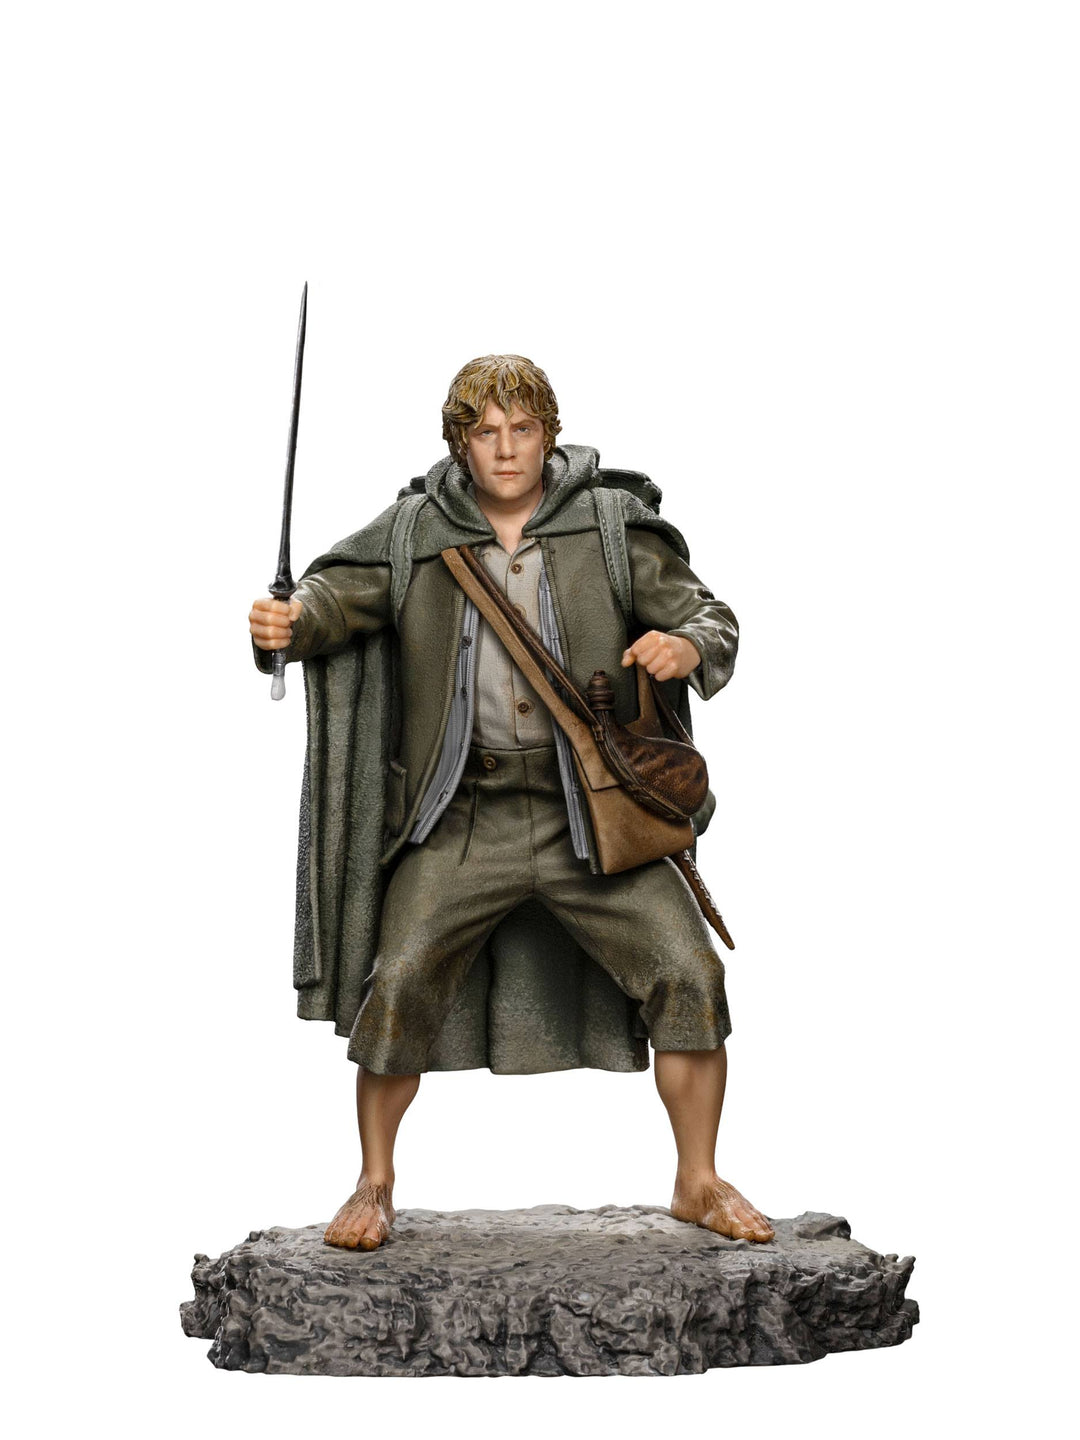 Iron Studios BDS Art Scale Statue 1-10  Scale Lord Of The Rings Sam